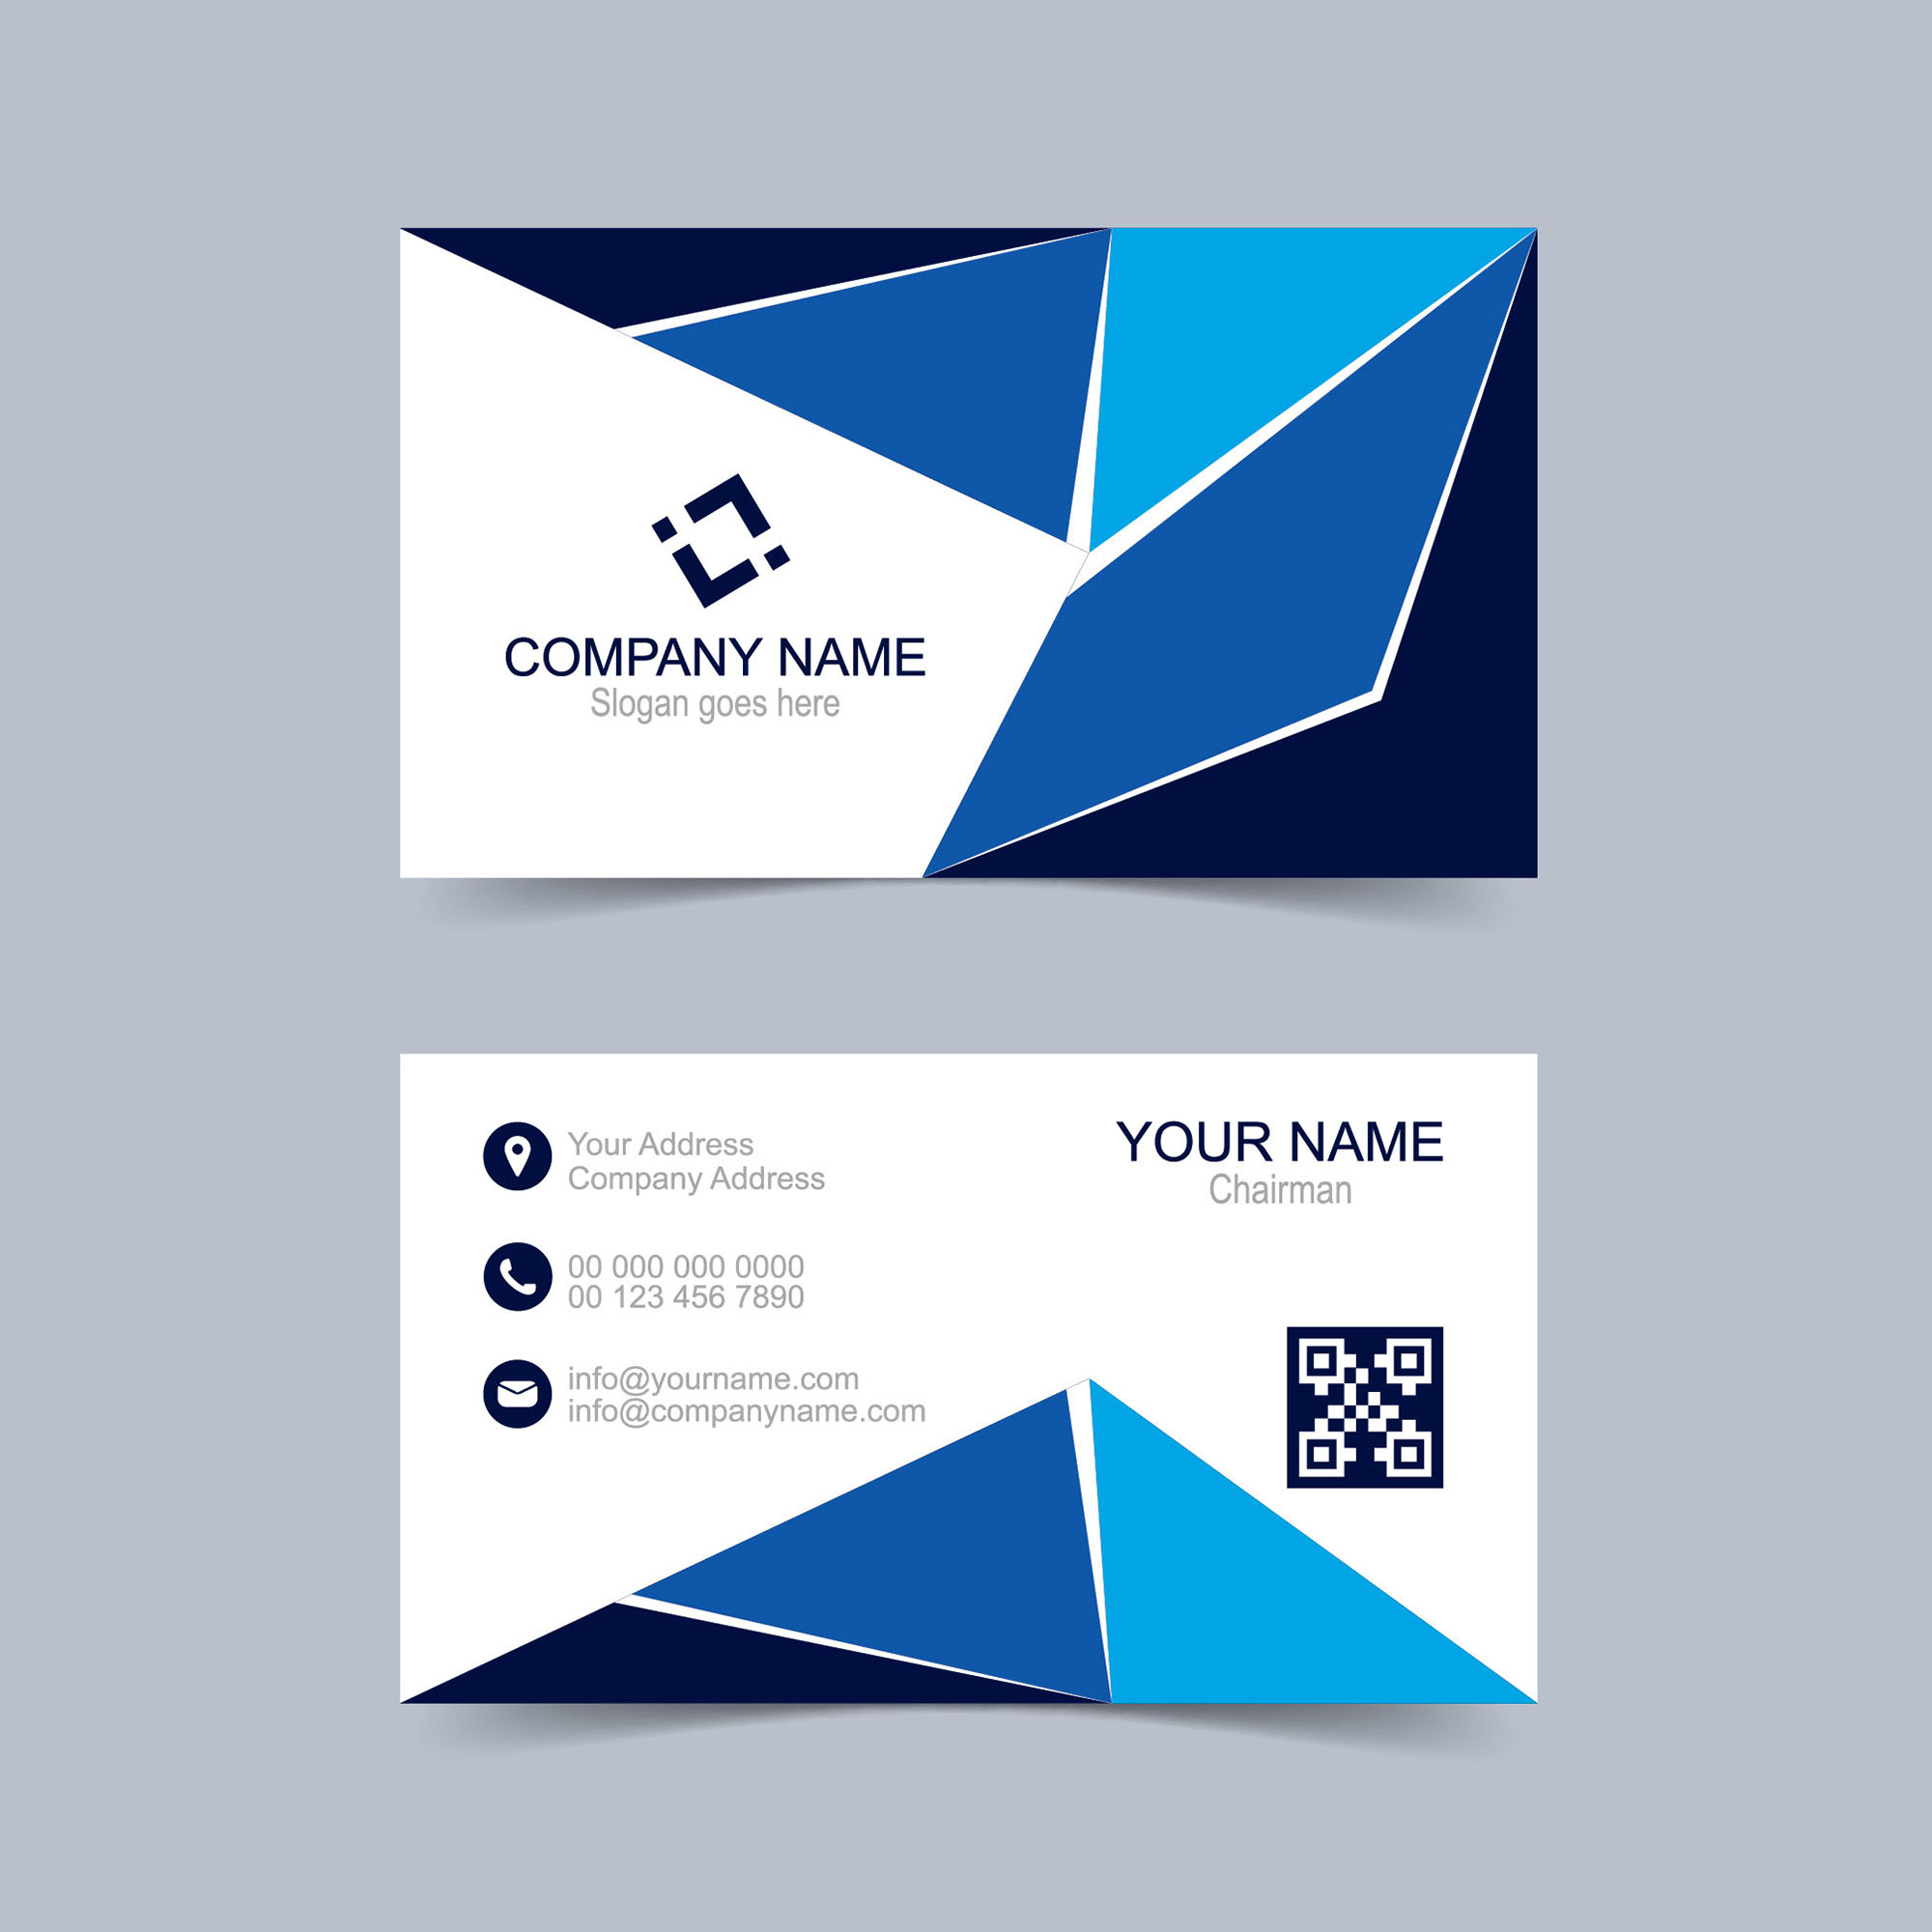 Calling Card Design Template Download With Regard To Template For Calling Card